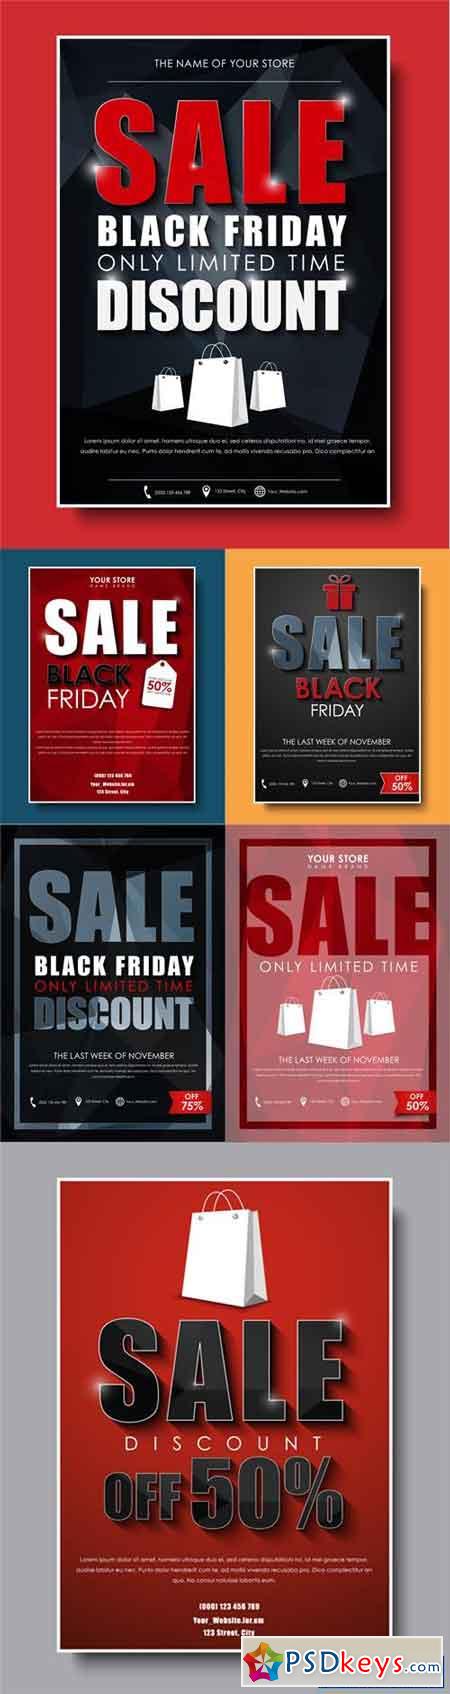 Template Poster Flyers Banners for Sales on Black Friday